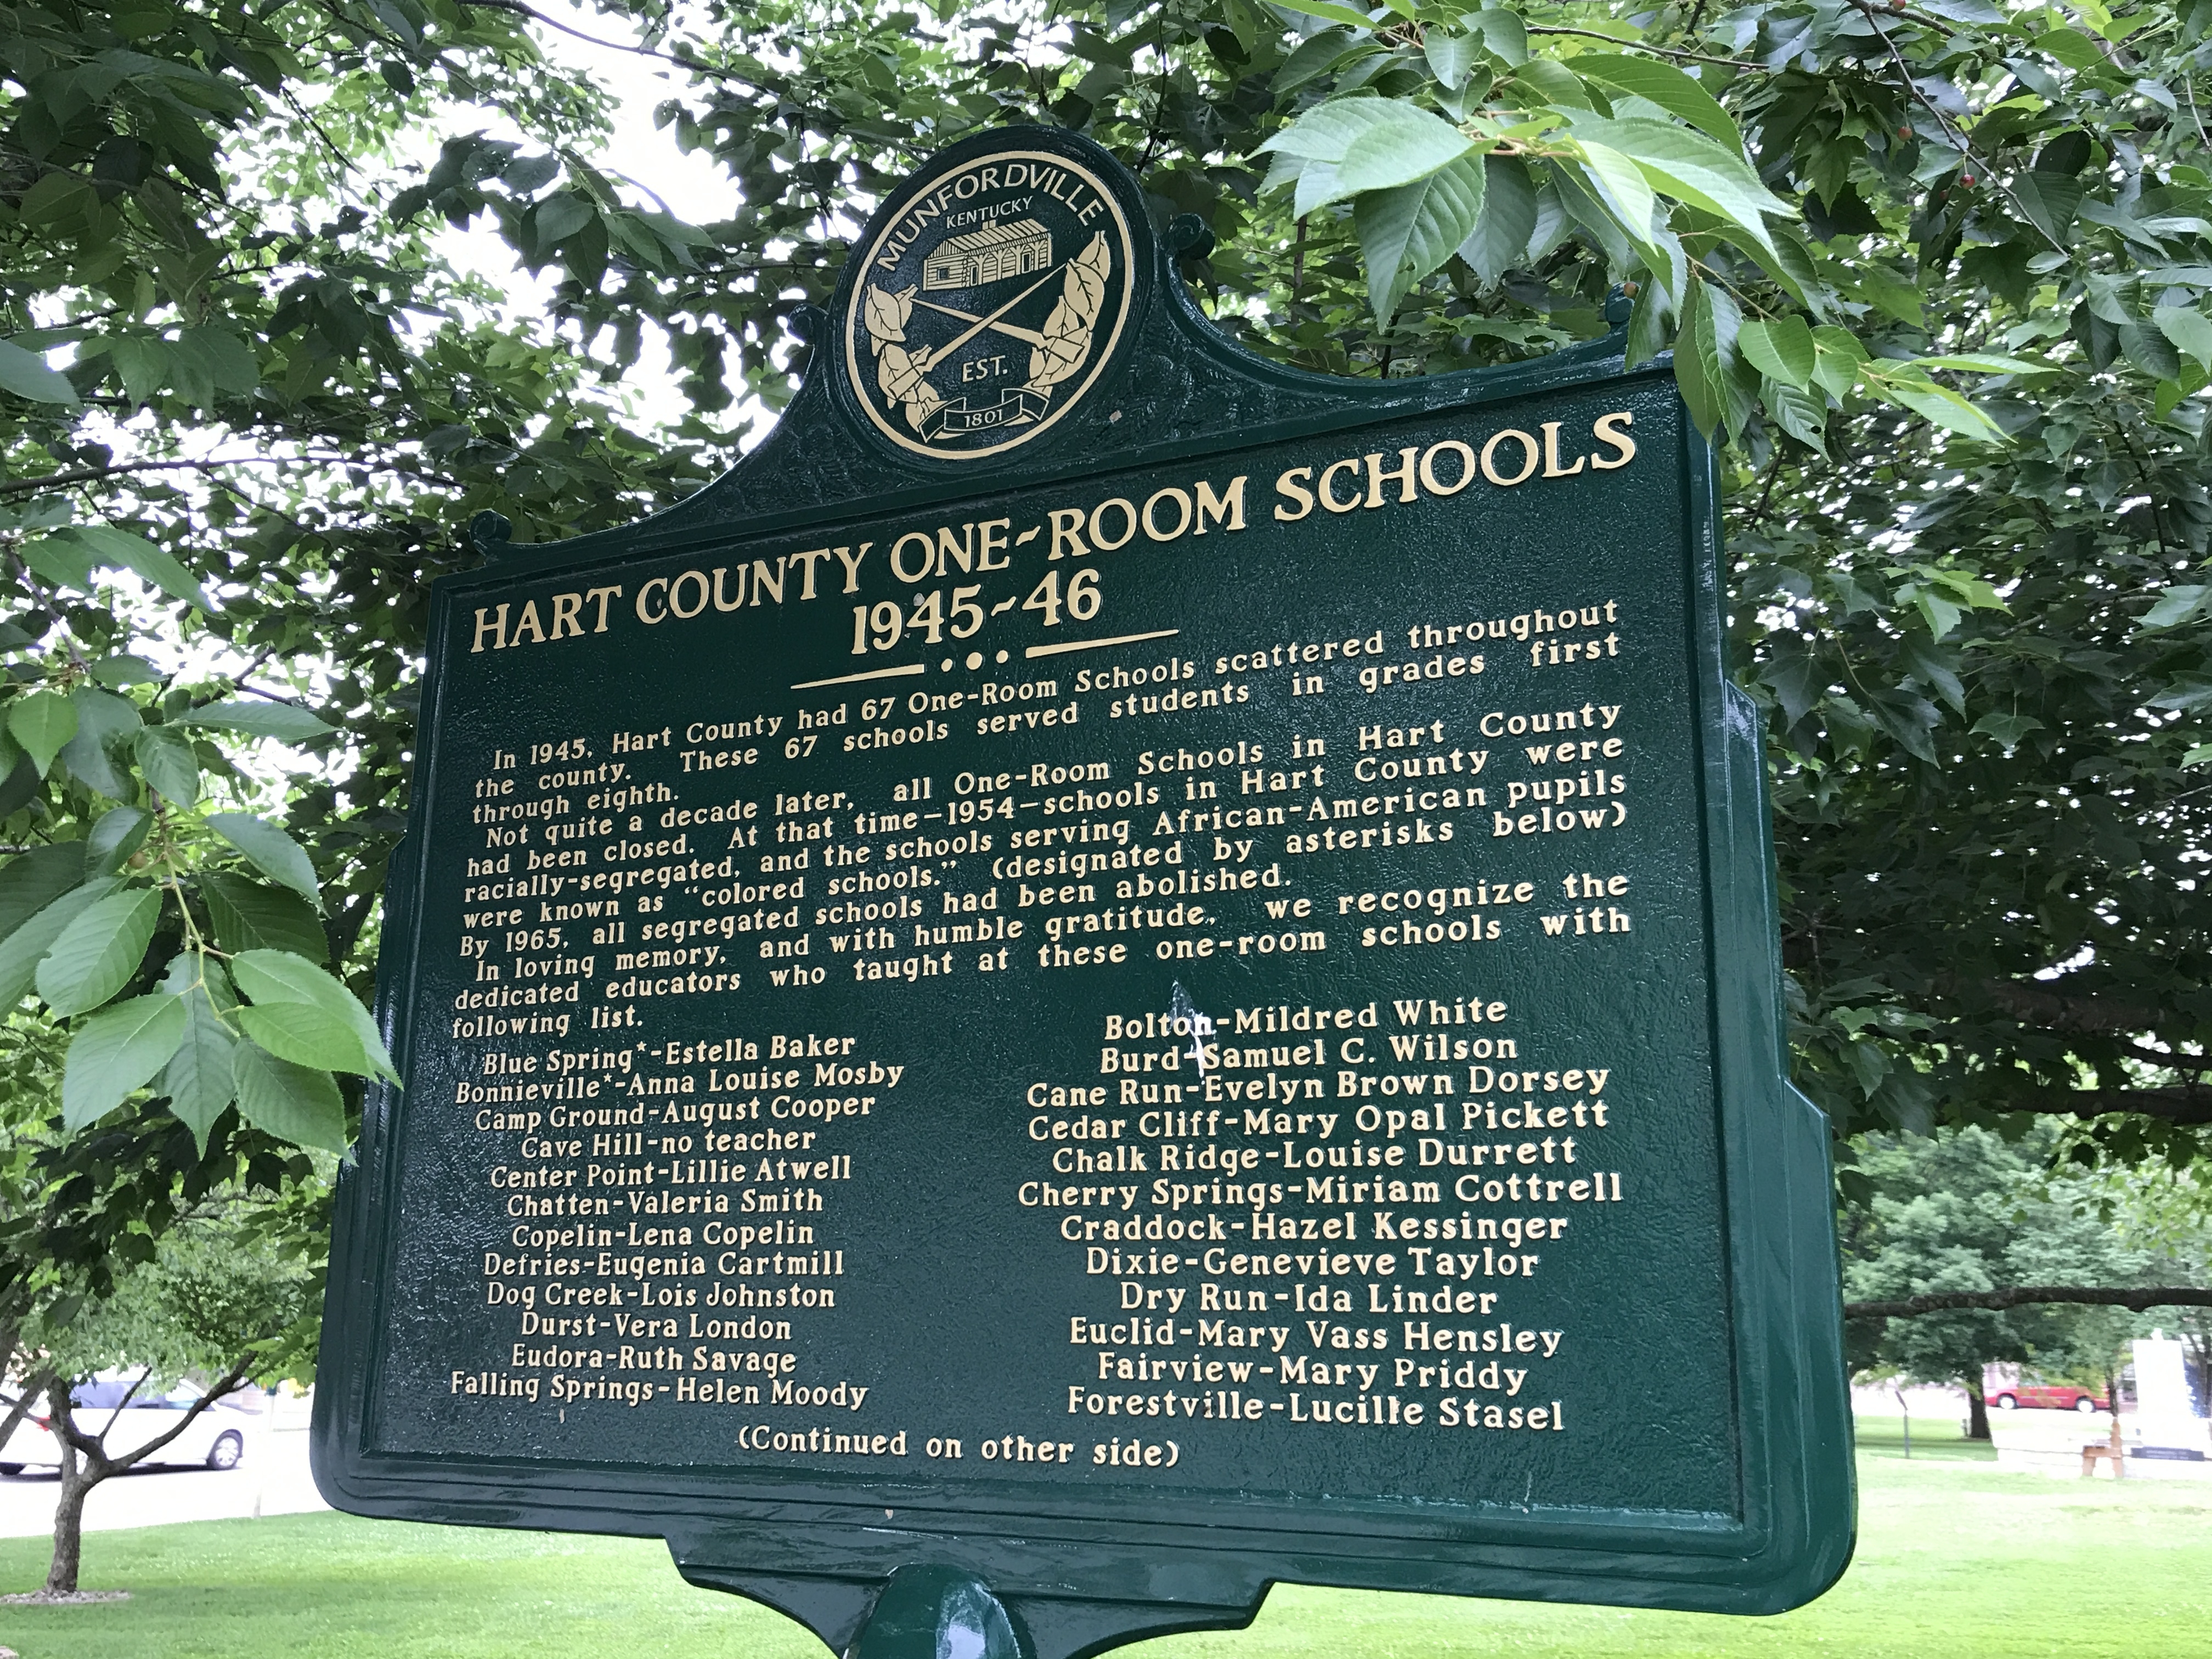 Hart County One-Room Schools Marker (Side A)